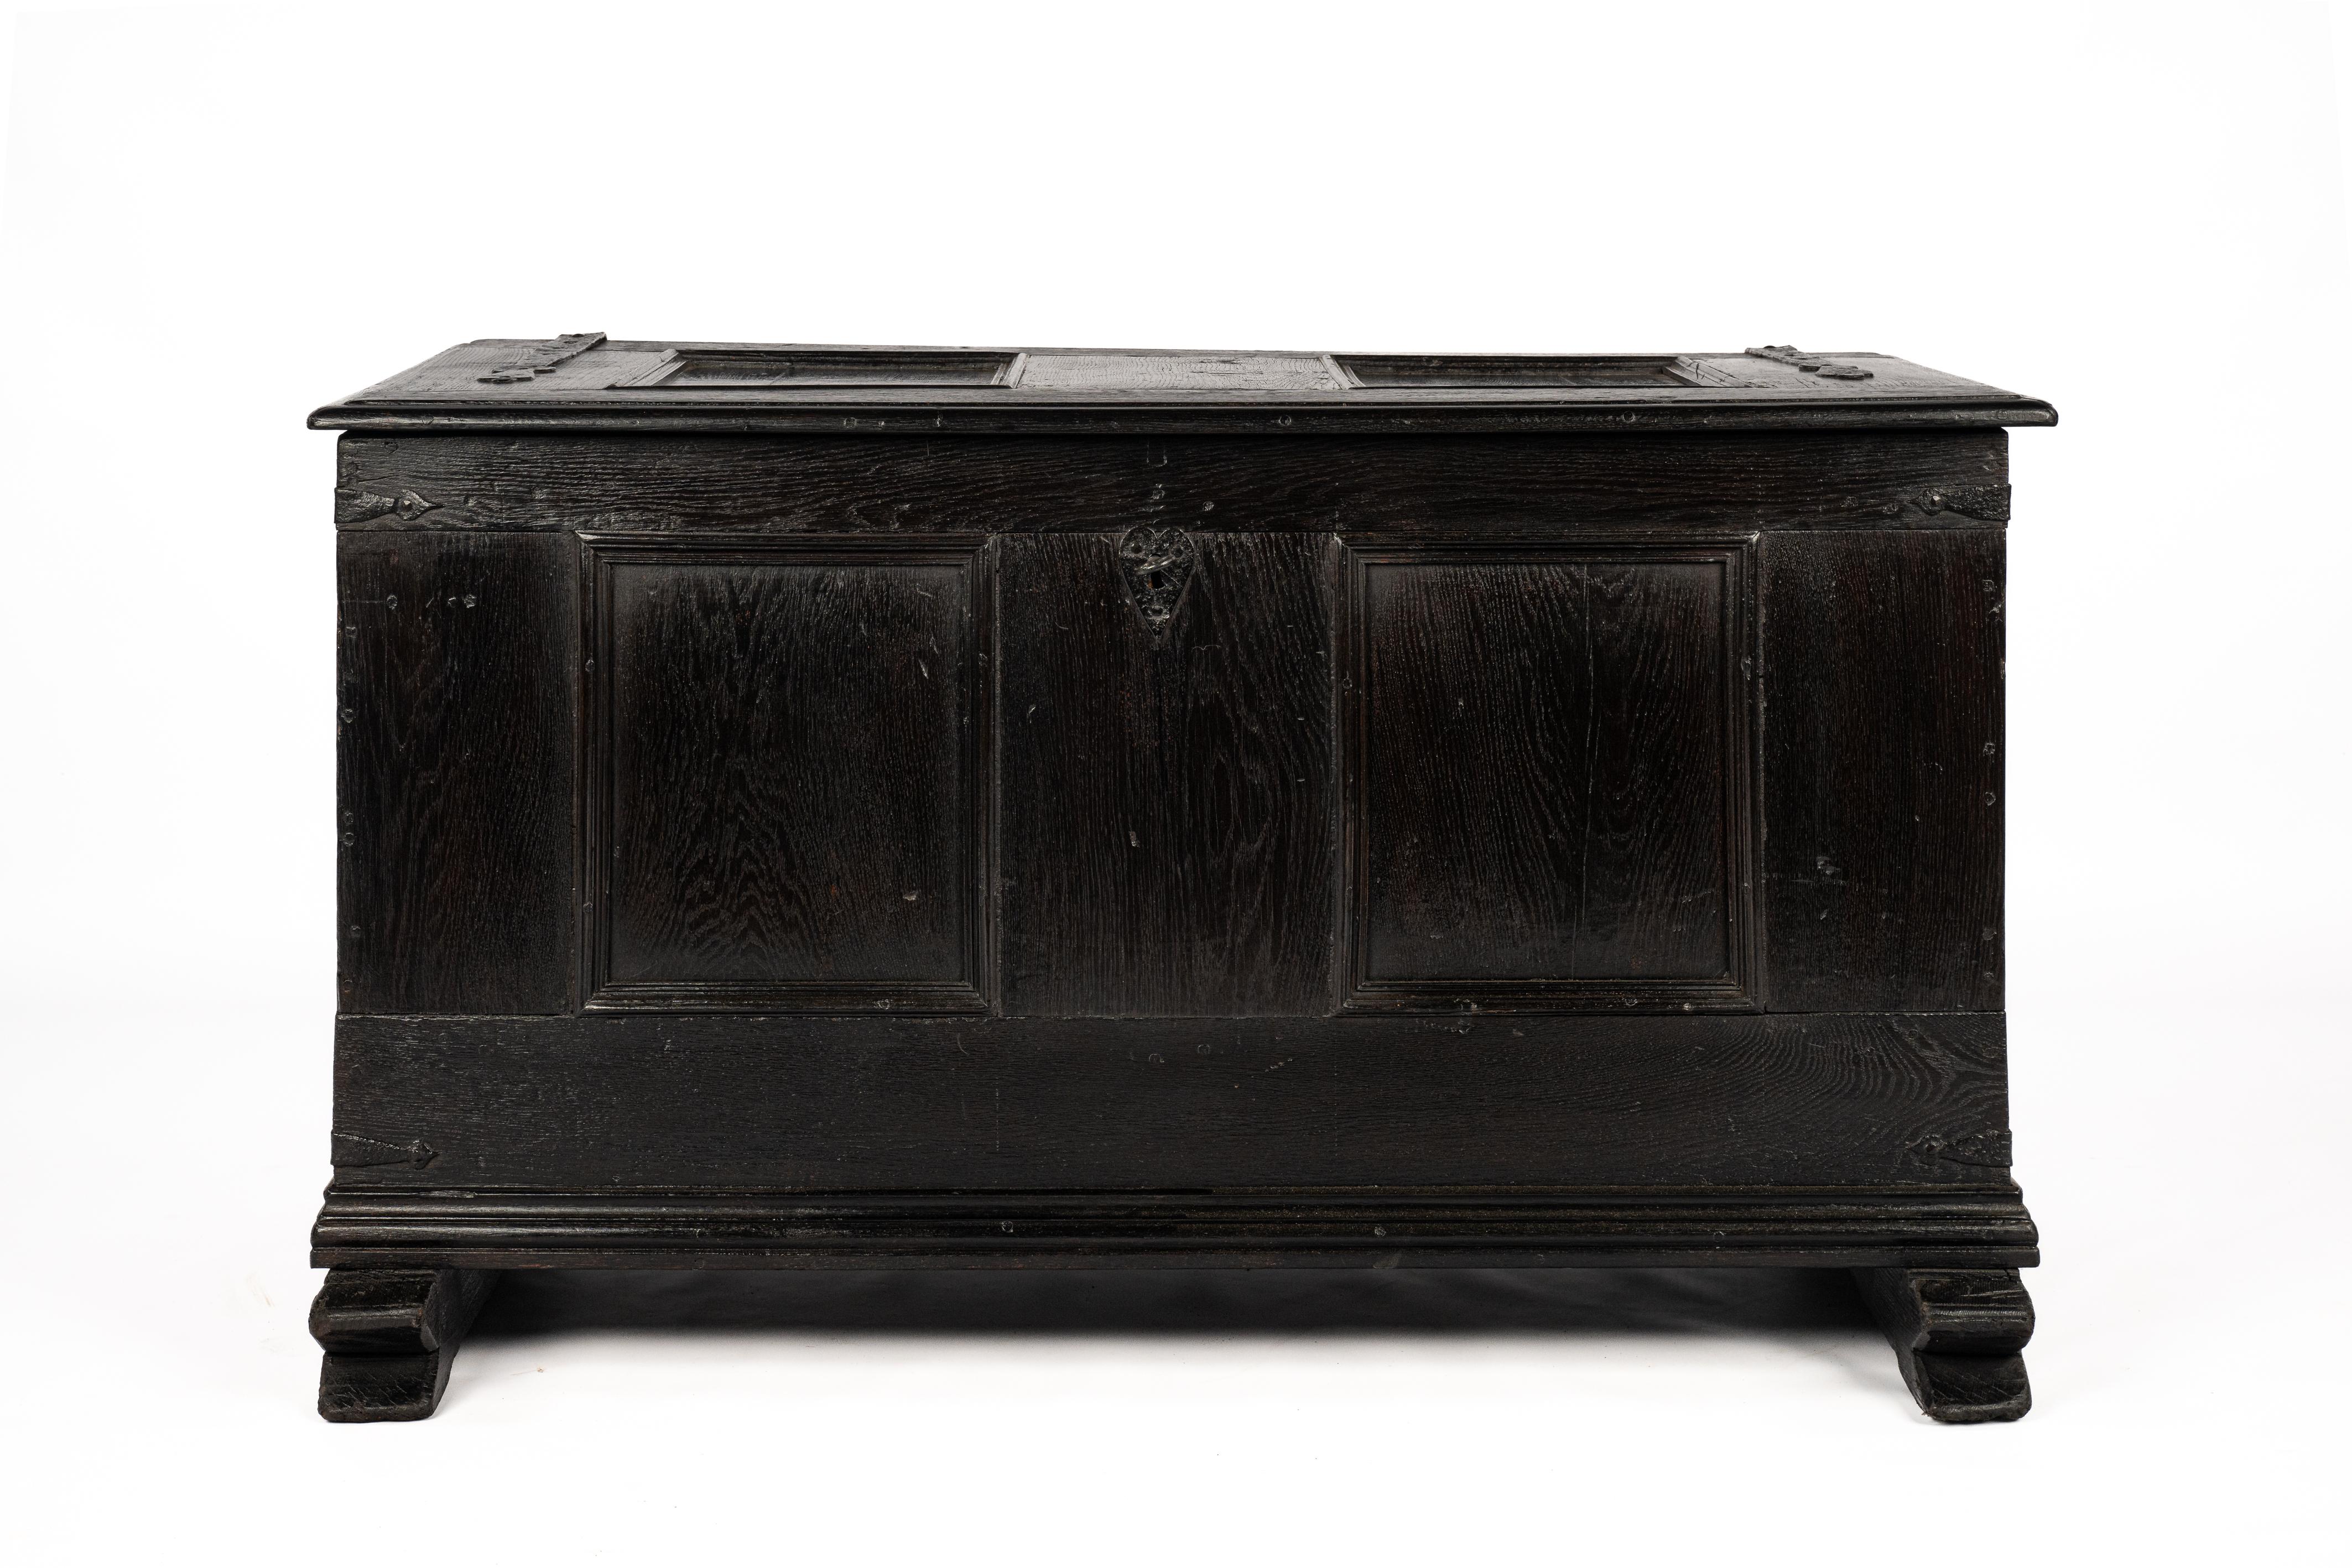 This exquisite chest was crafted in Germany in the latter half of the 18th century. Both the lid and the front of the chest feature two flat recessed panels surrounded by a subtle frame. The chest rests on two elongated feet which were securely